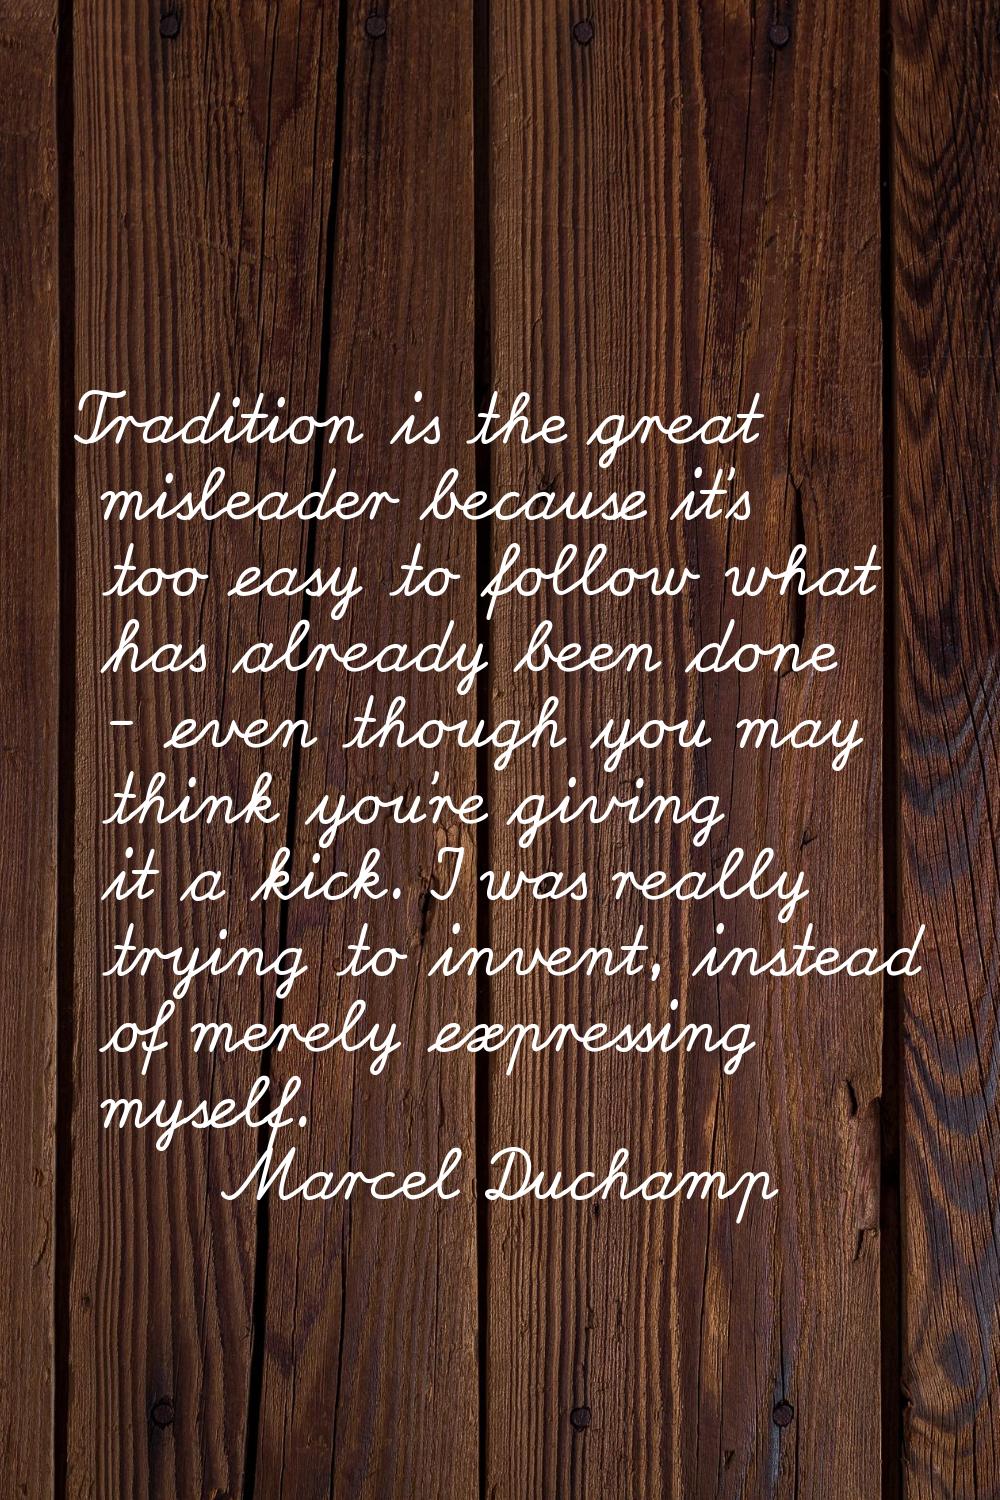 Tradition is the great misleader because it's too easy to follow what has already been done - even 